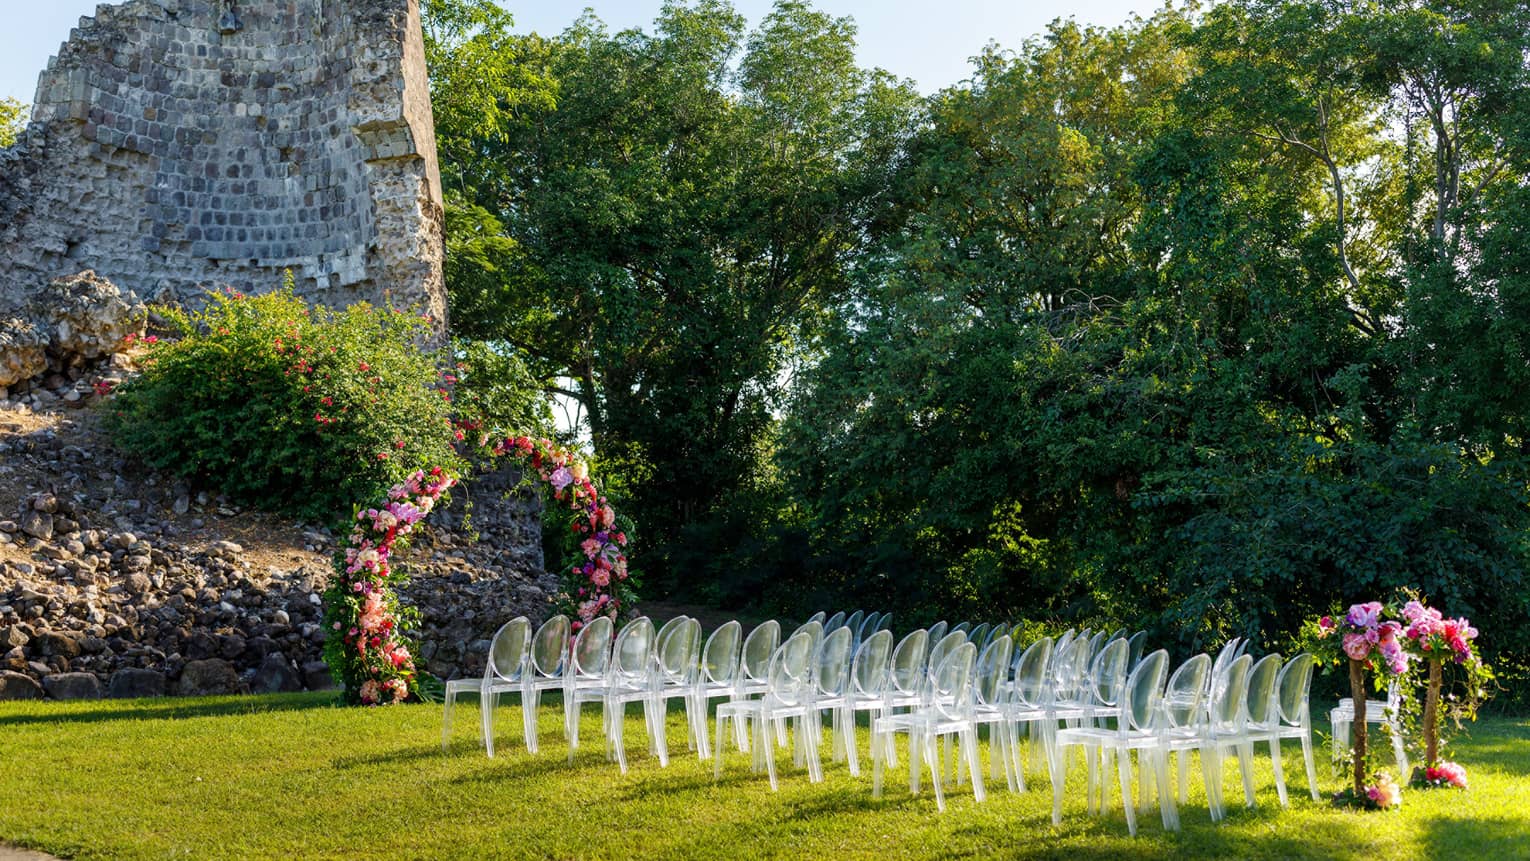 Outdoor wedding setup at Tea Mill rock structure, lucite chair grouping, flowers, flanked by bushes